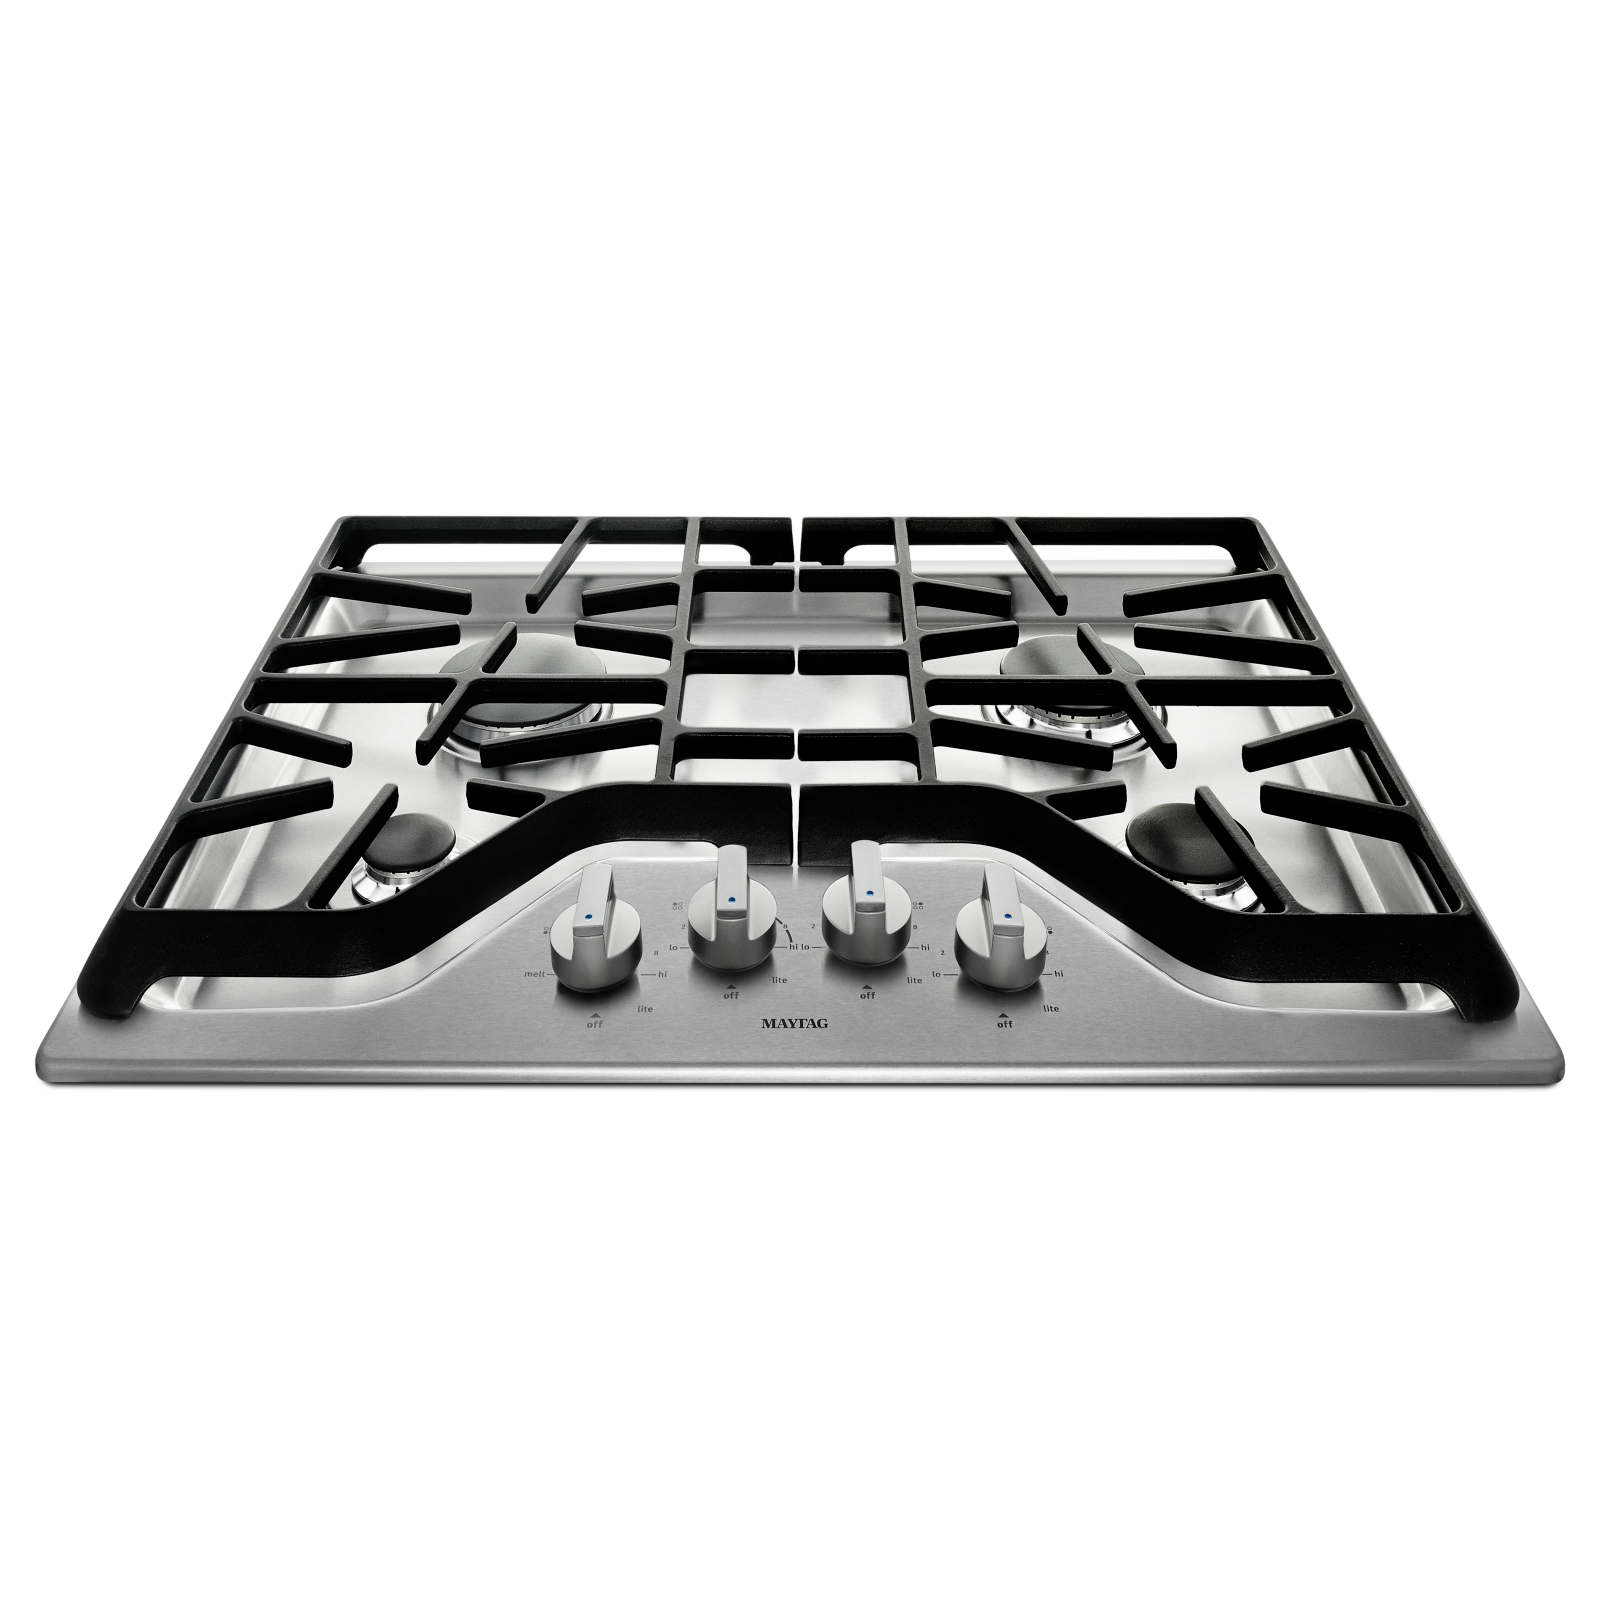 Maytag - 36 Inch Gas Cooktop in Stainless - MGC9536DS